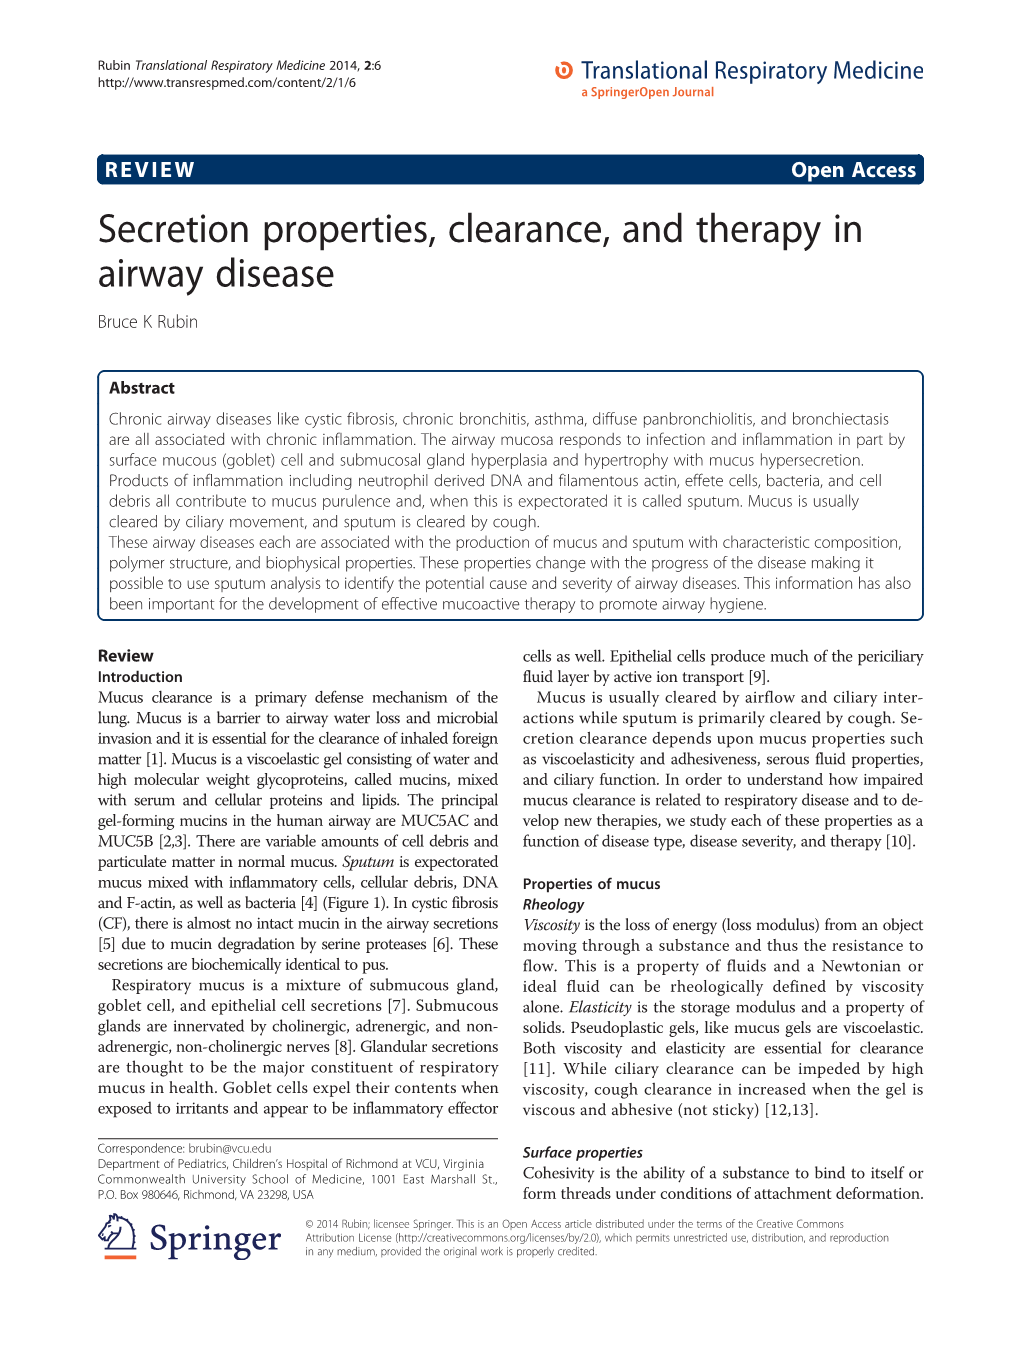 Secretion Properties, Clearance, and Therapy in Airway Disease Bruce K Rubin